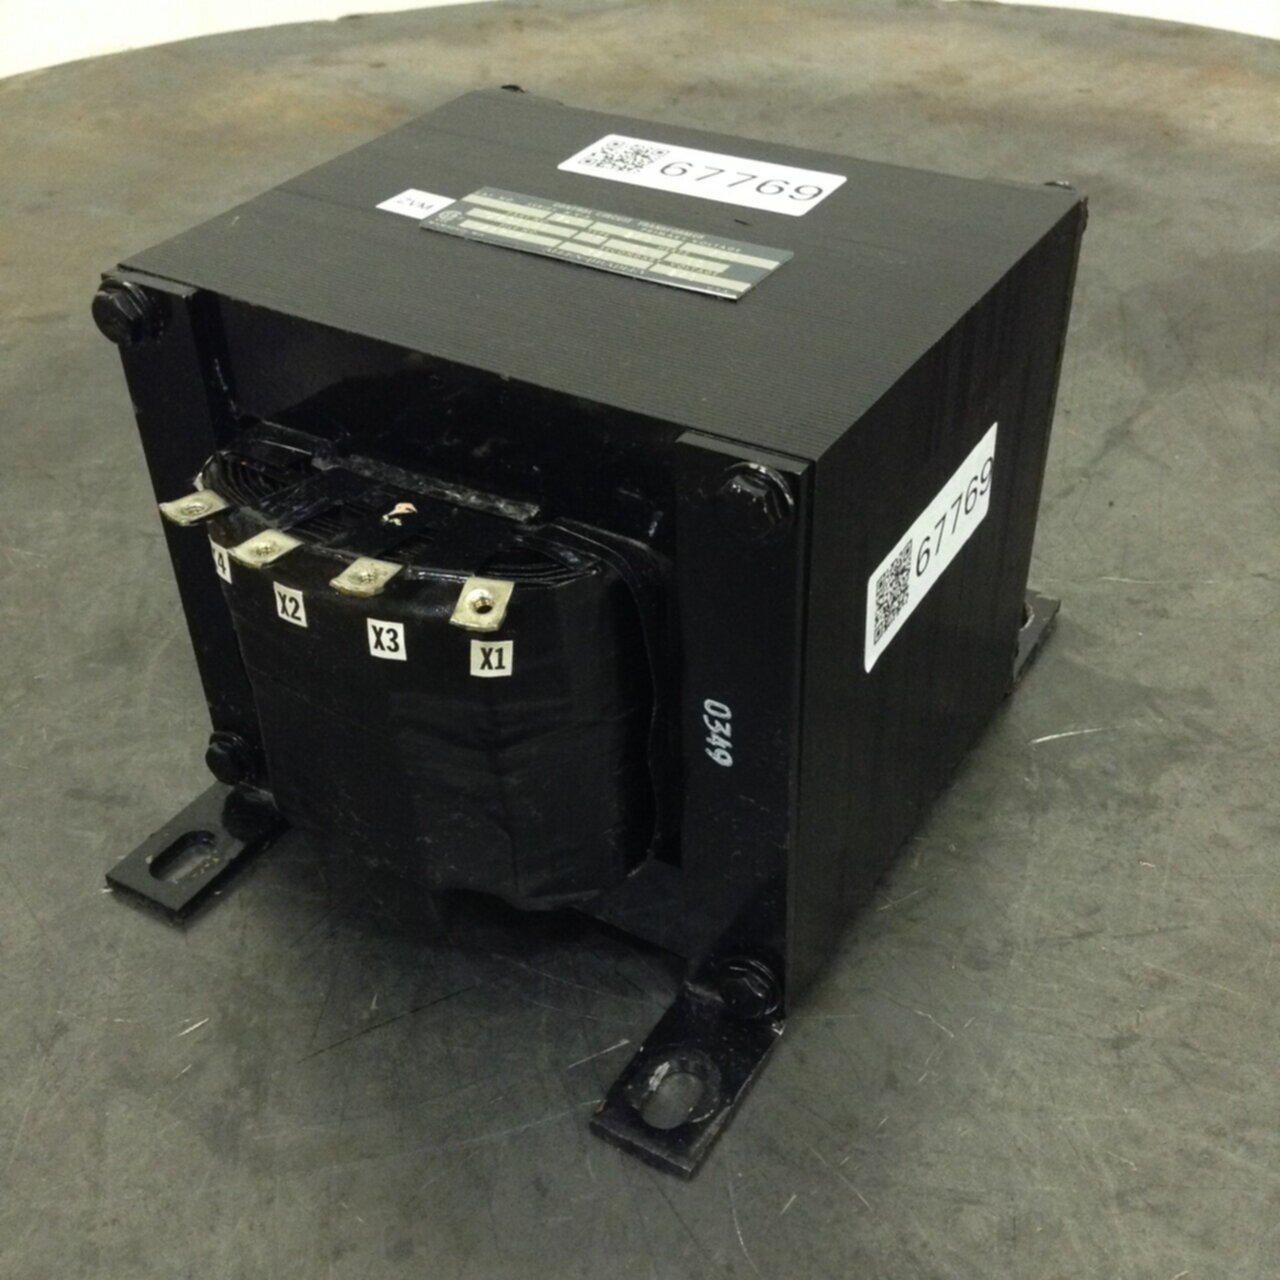 Details about   SOLA ELECTRIC 5.5 kVA Transformer 63-23-215-8 Used #54088 